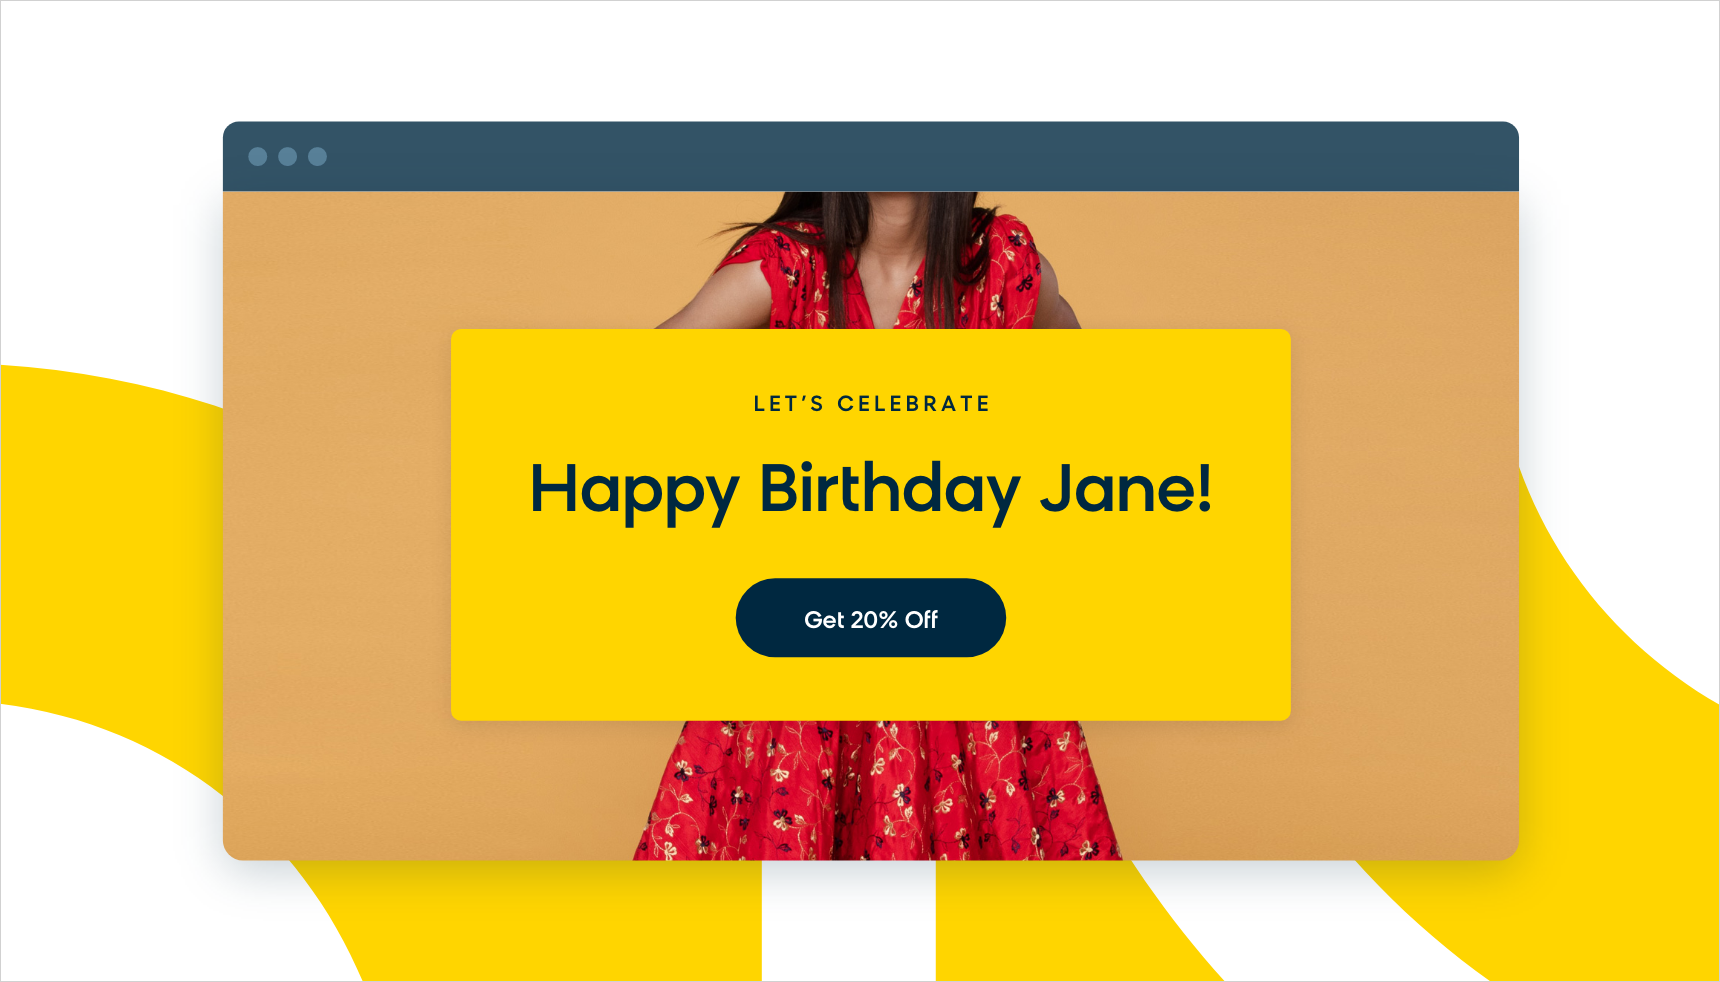 Use your e-commerce marketing automation to send personalized birthday messages to your customers.